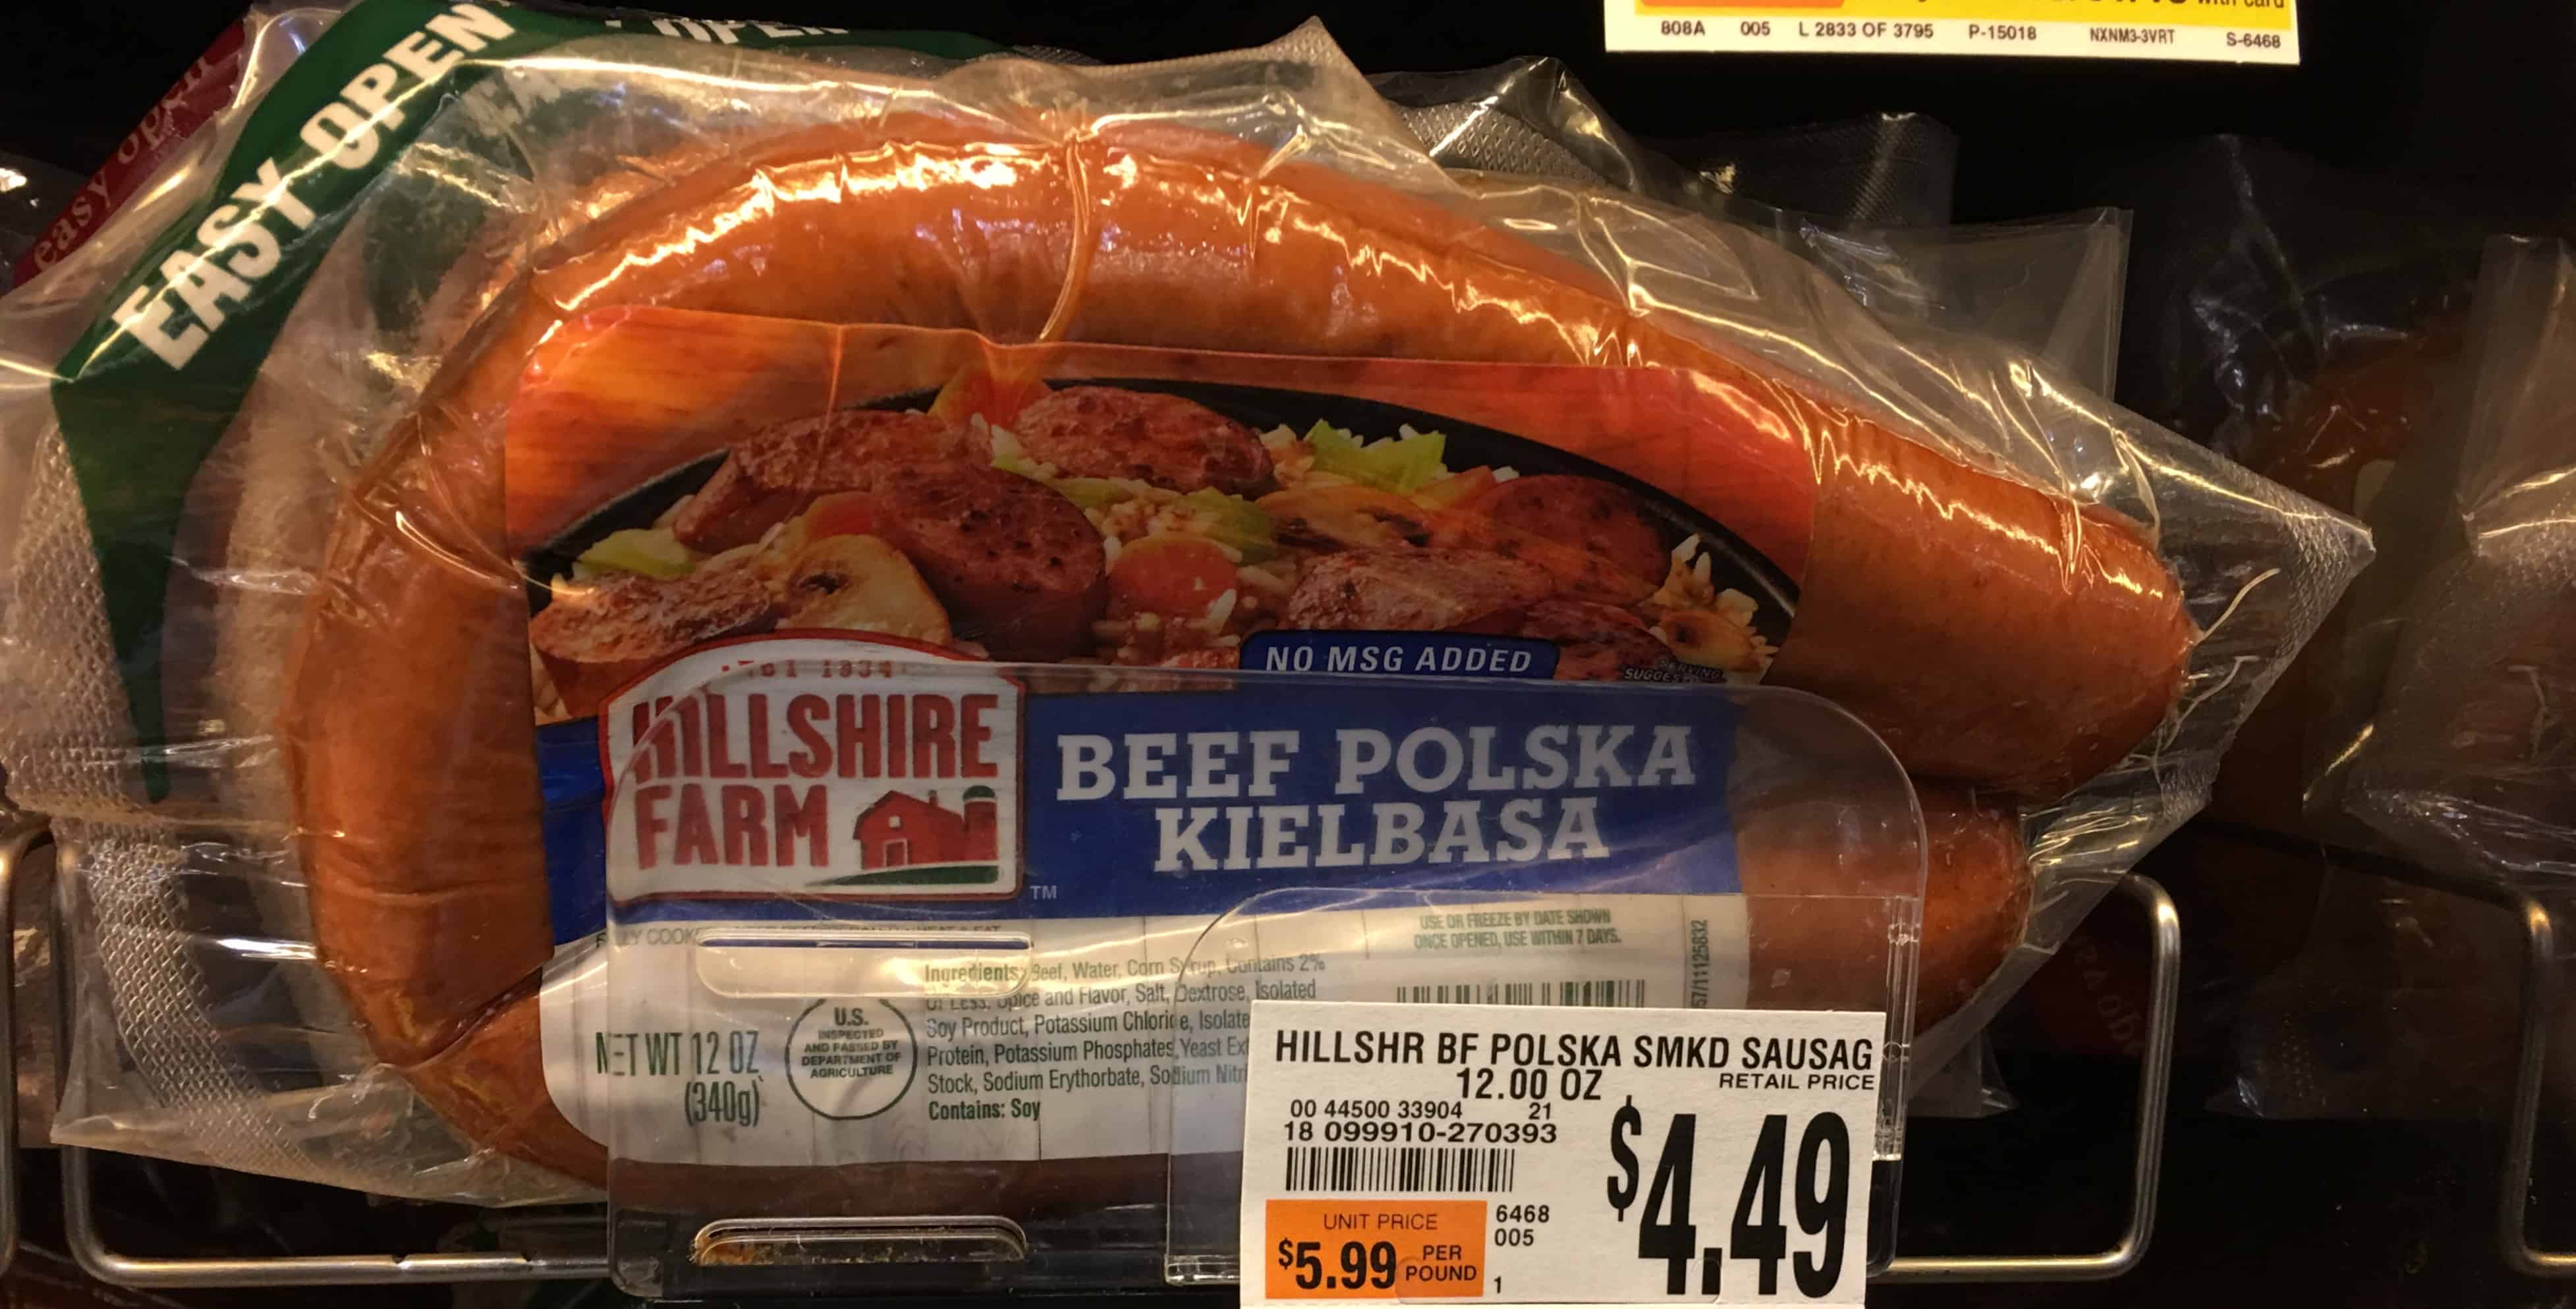 Giant: Hillshire Farm Sausage Just $2.25 Each Starting 6/8!